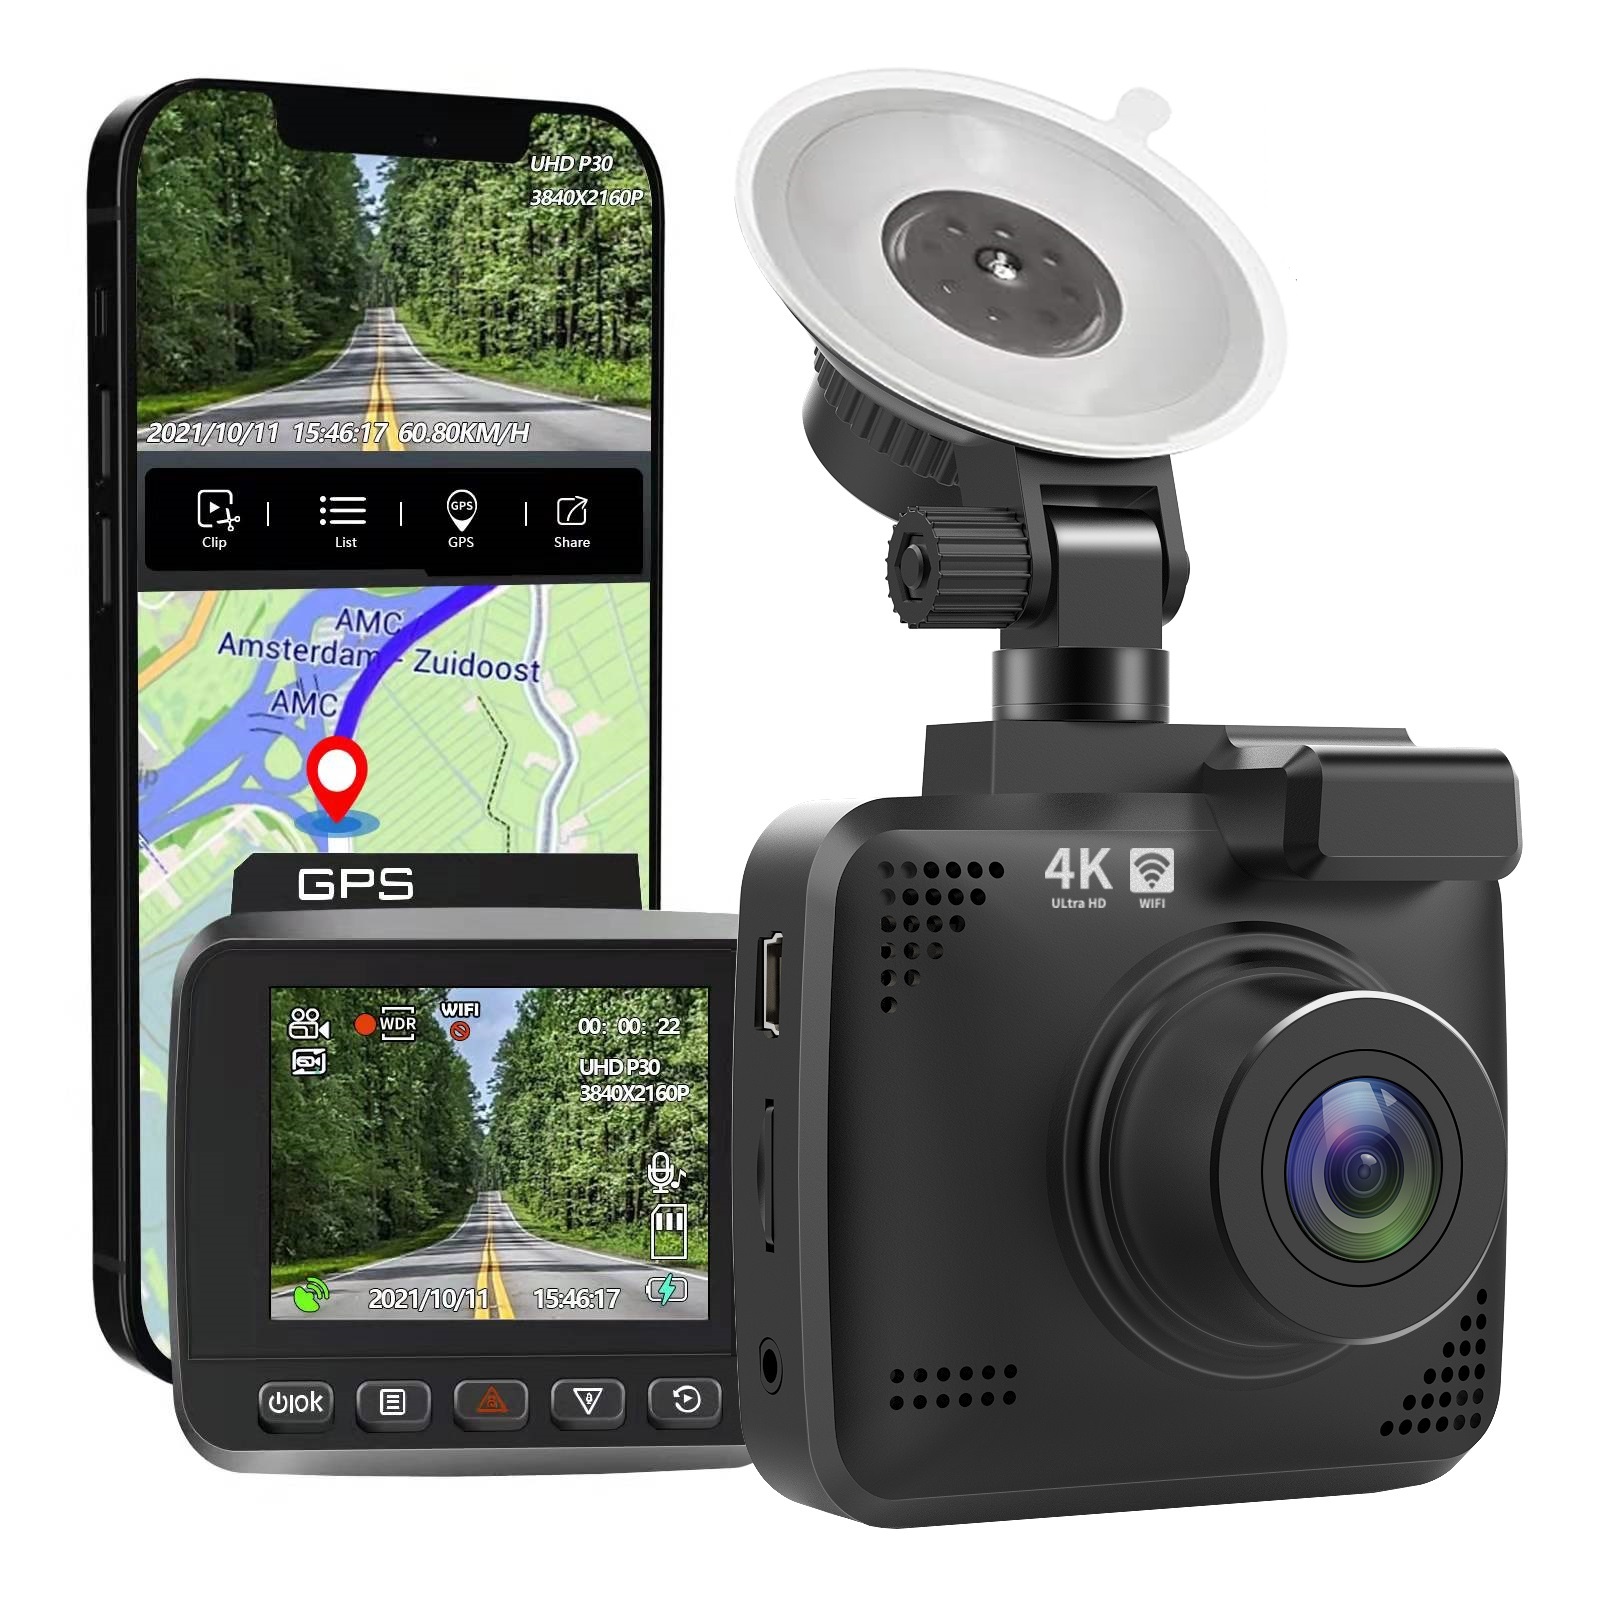 4k Driving Recorder Built-In Wifi GPS Car Dashboard Camera Recorder Dash Cam with Night Vision